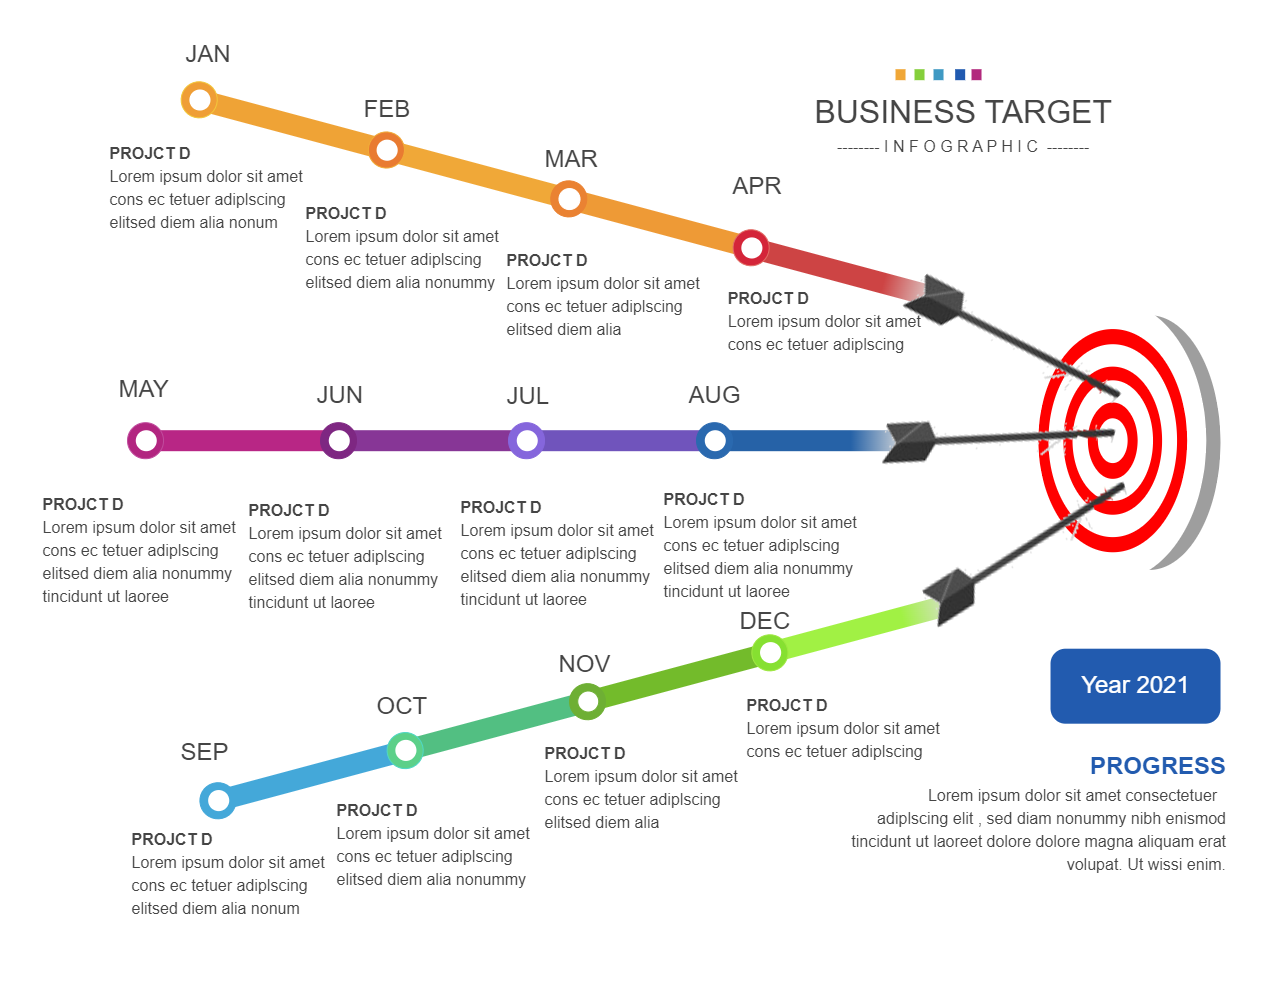 Business Target Infographic Diagram